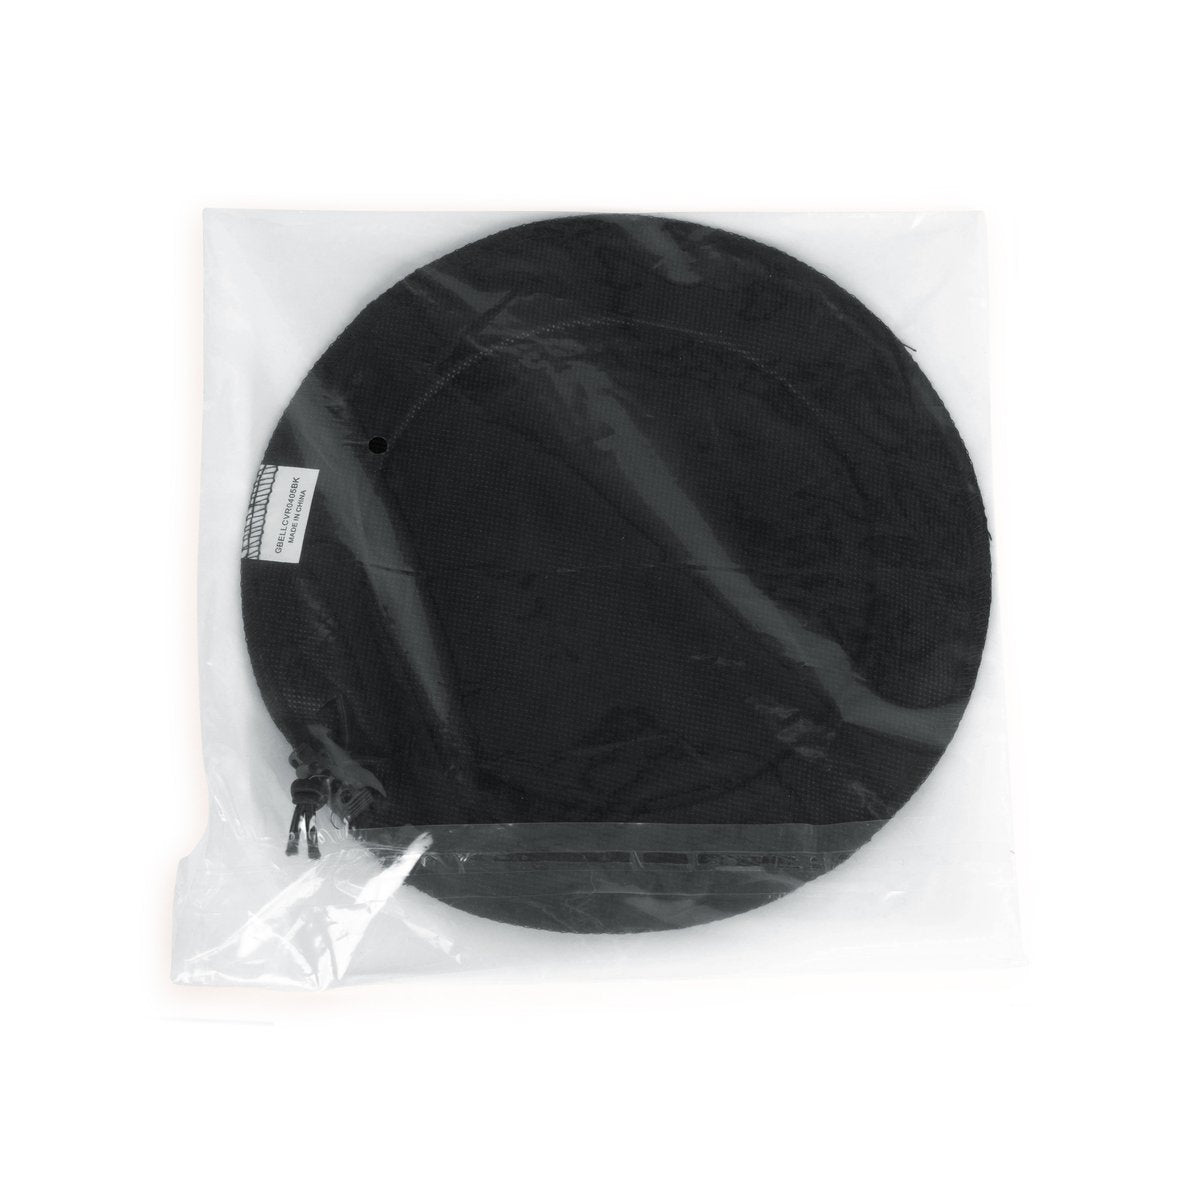 GBELLCVR1415BK - Black Bell Cover with MERV 13 filter, 14-15 Inches